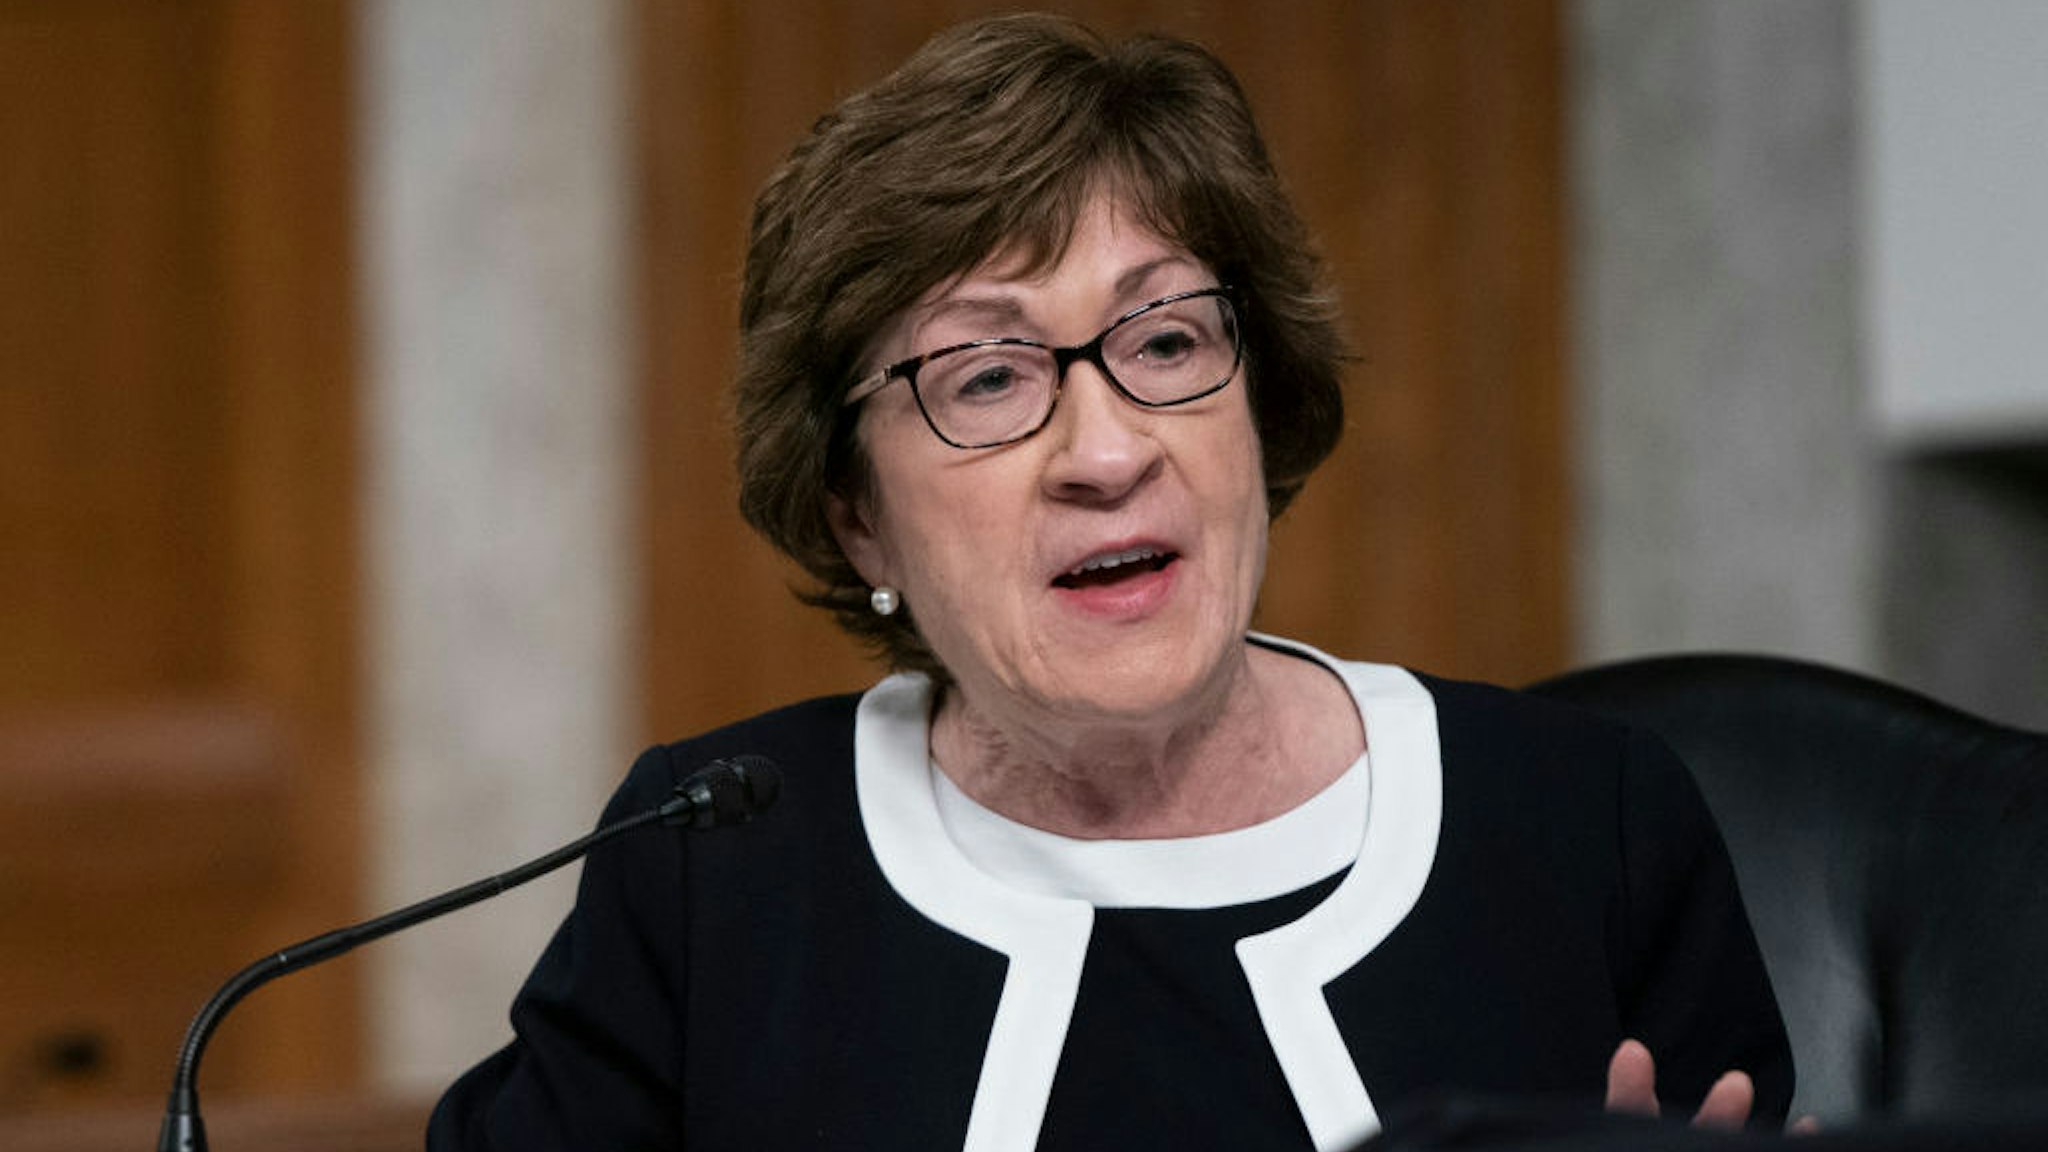 WASHINGTON, DC - SEPTEMBER 23: U.S. Sen. Susan Collins (R-ME) speaks at a hearing of the Senate Health, Education, Labor and Pensions Committee on September 23, 2020 in Washington, DC. The committee is examining the federal response to the coronavirus pandemic. (Photo by Alex Edelman-Pool/Getty Images)